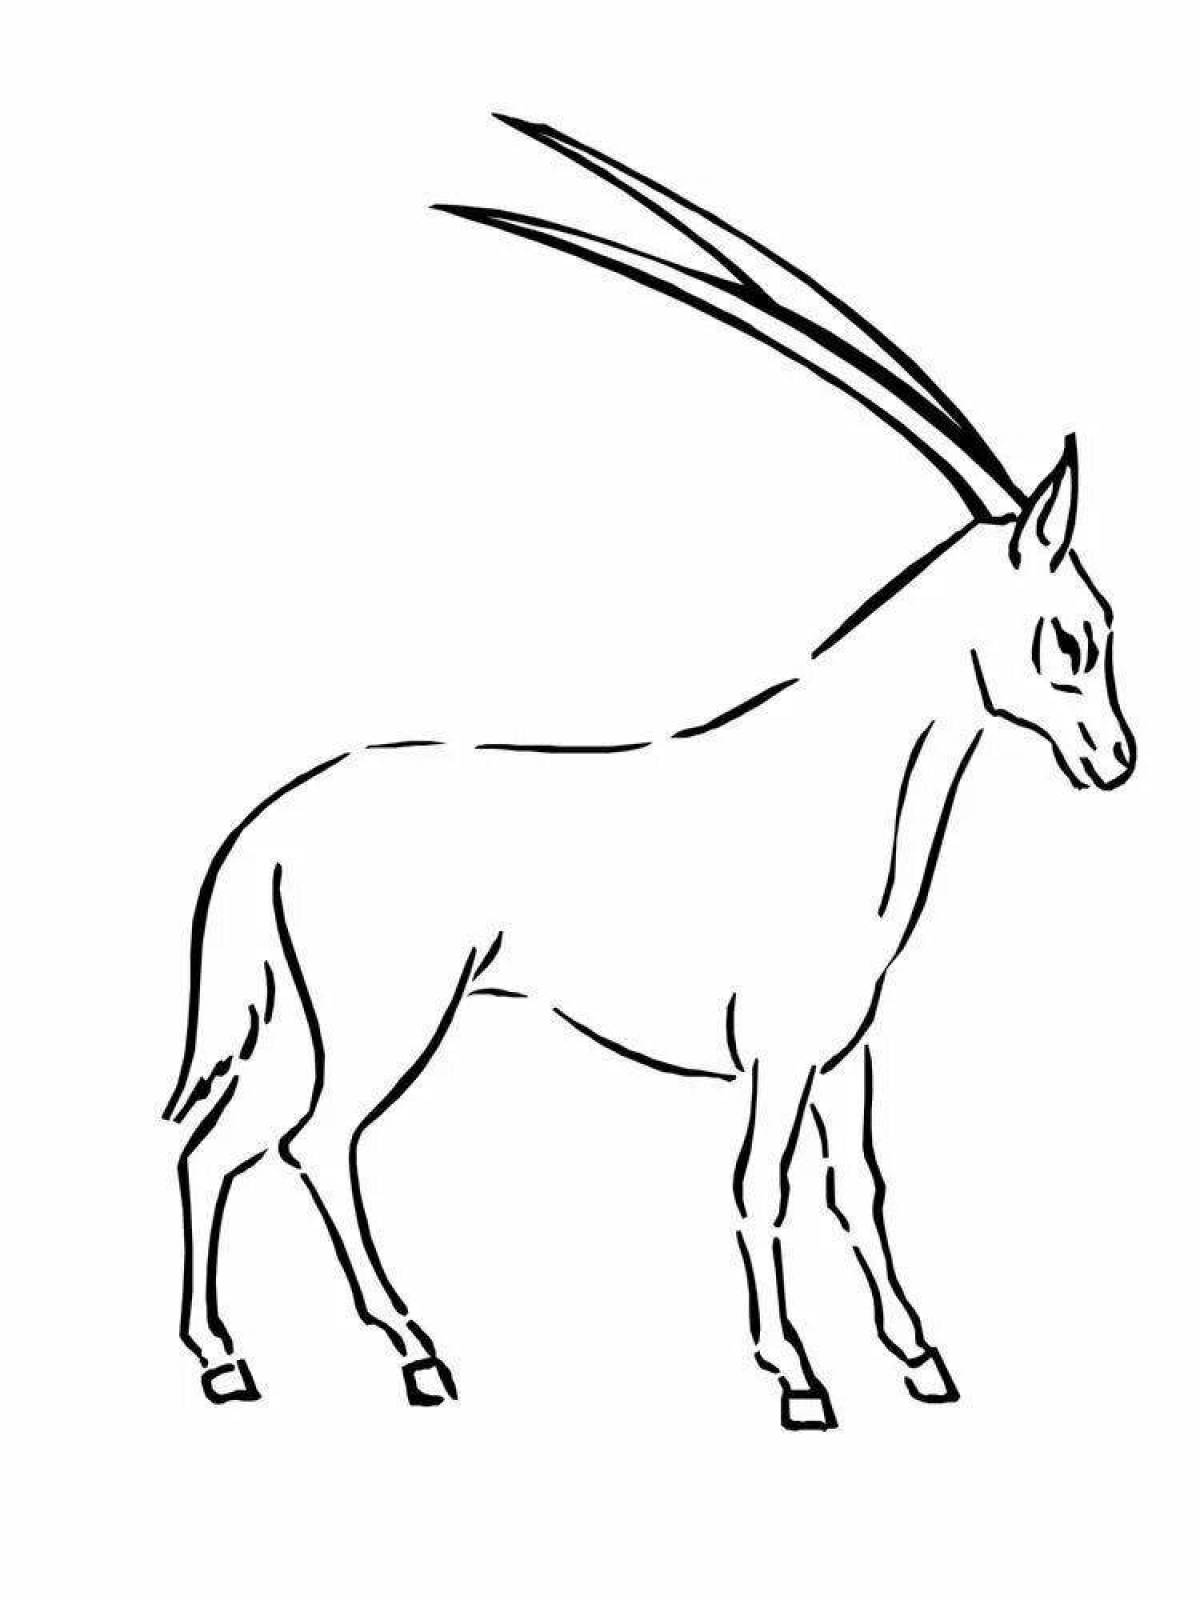 Glorious golden antelope coloring page